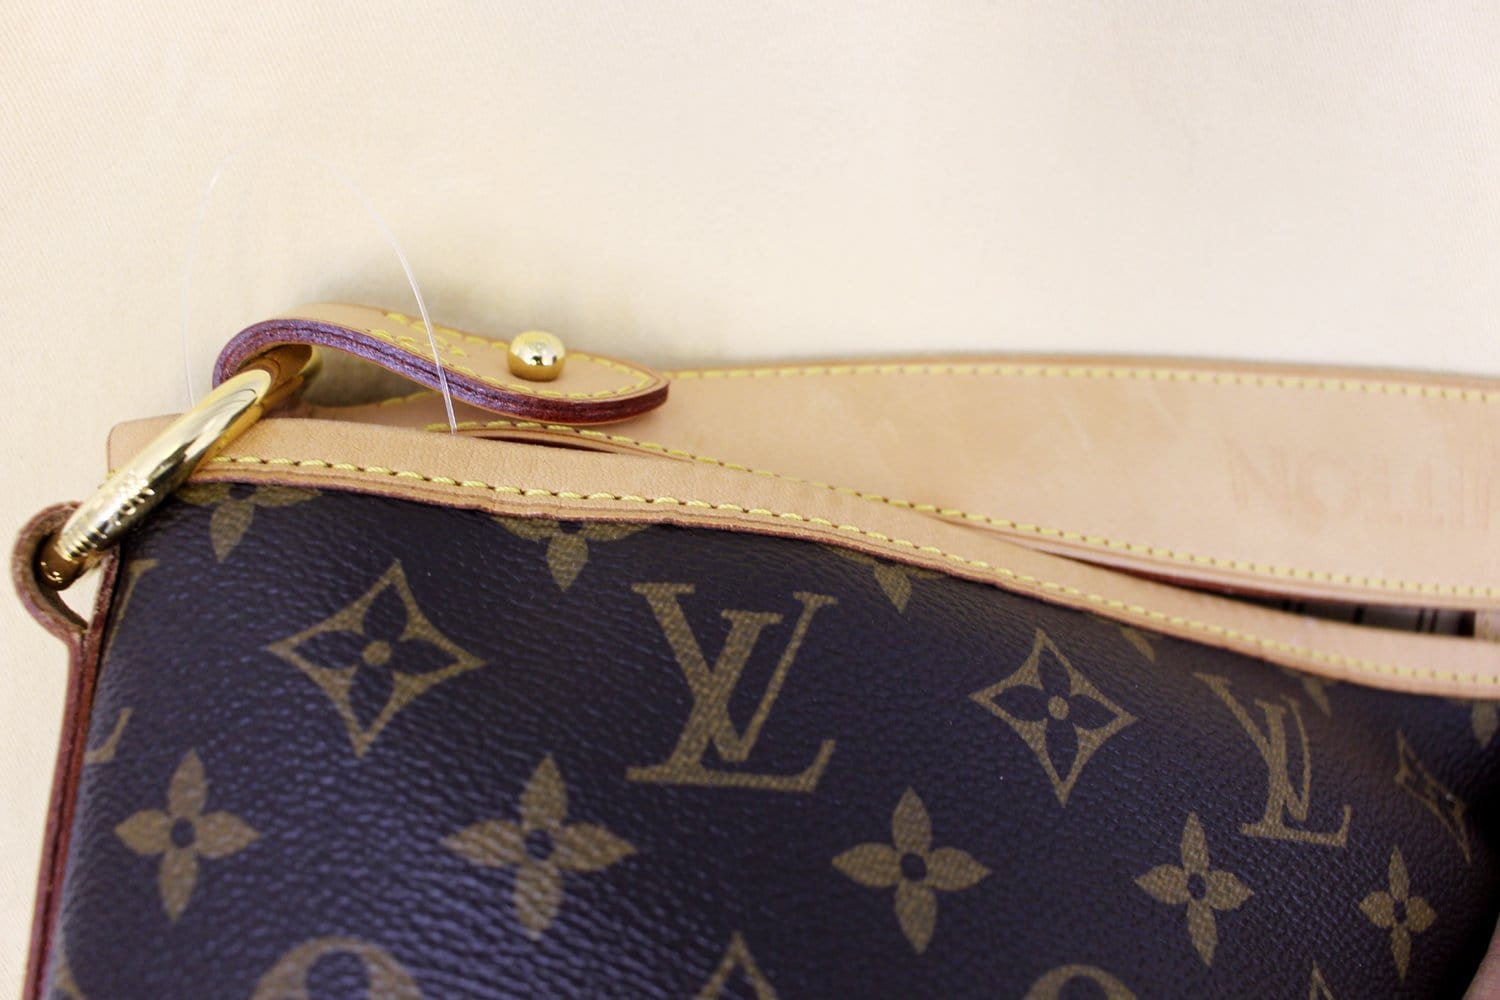 Louis Vuitton: A Pre-Owned Reference Guide: Thompson, Deanna